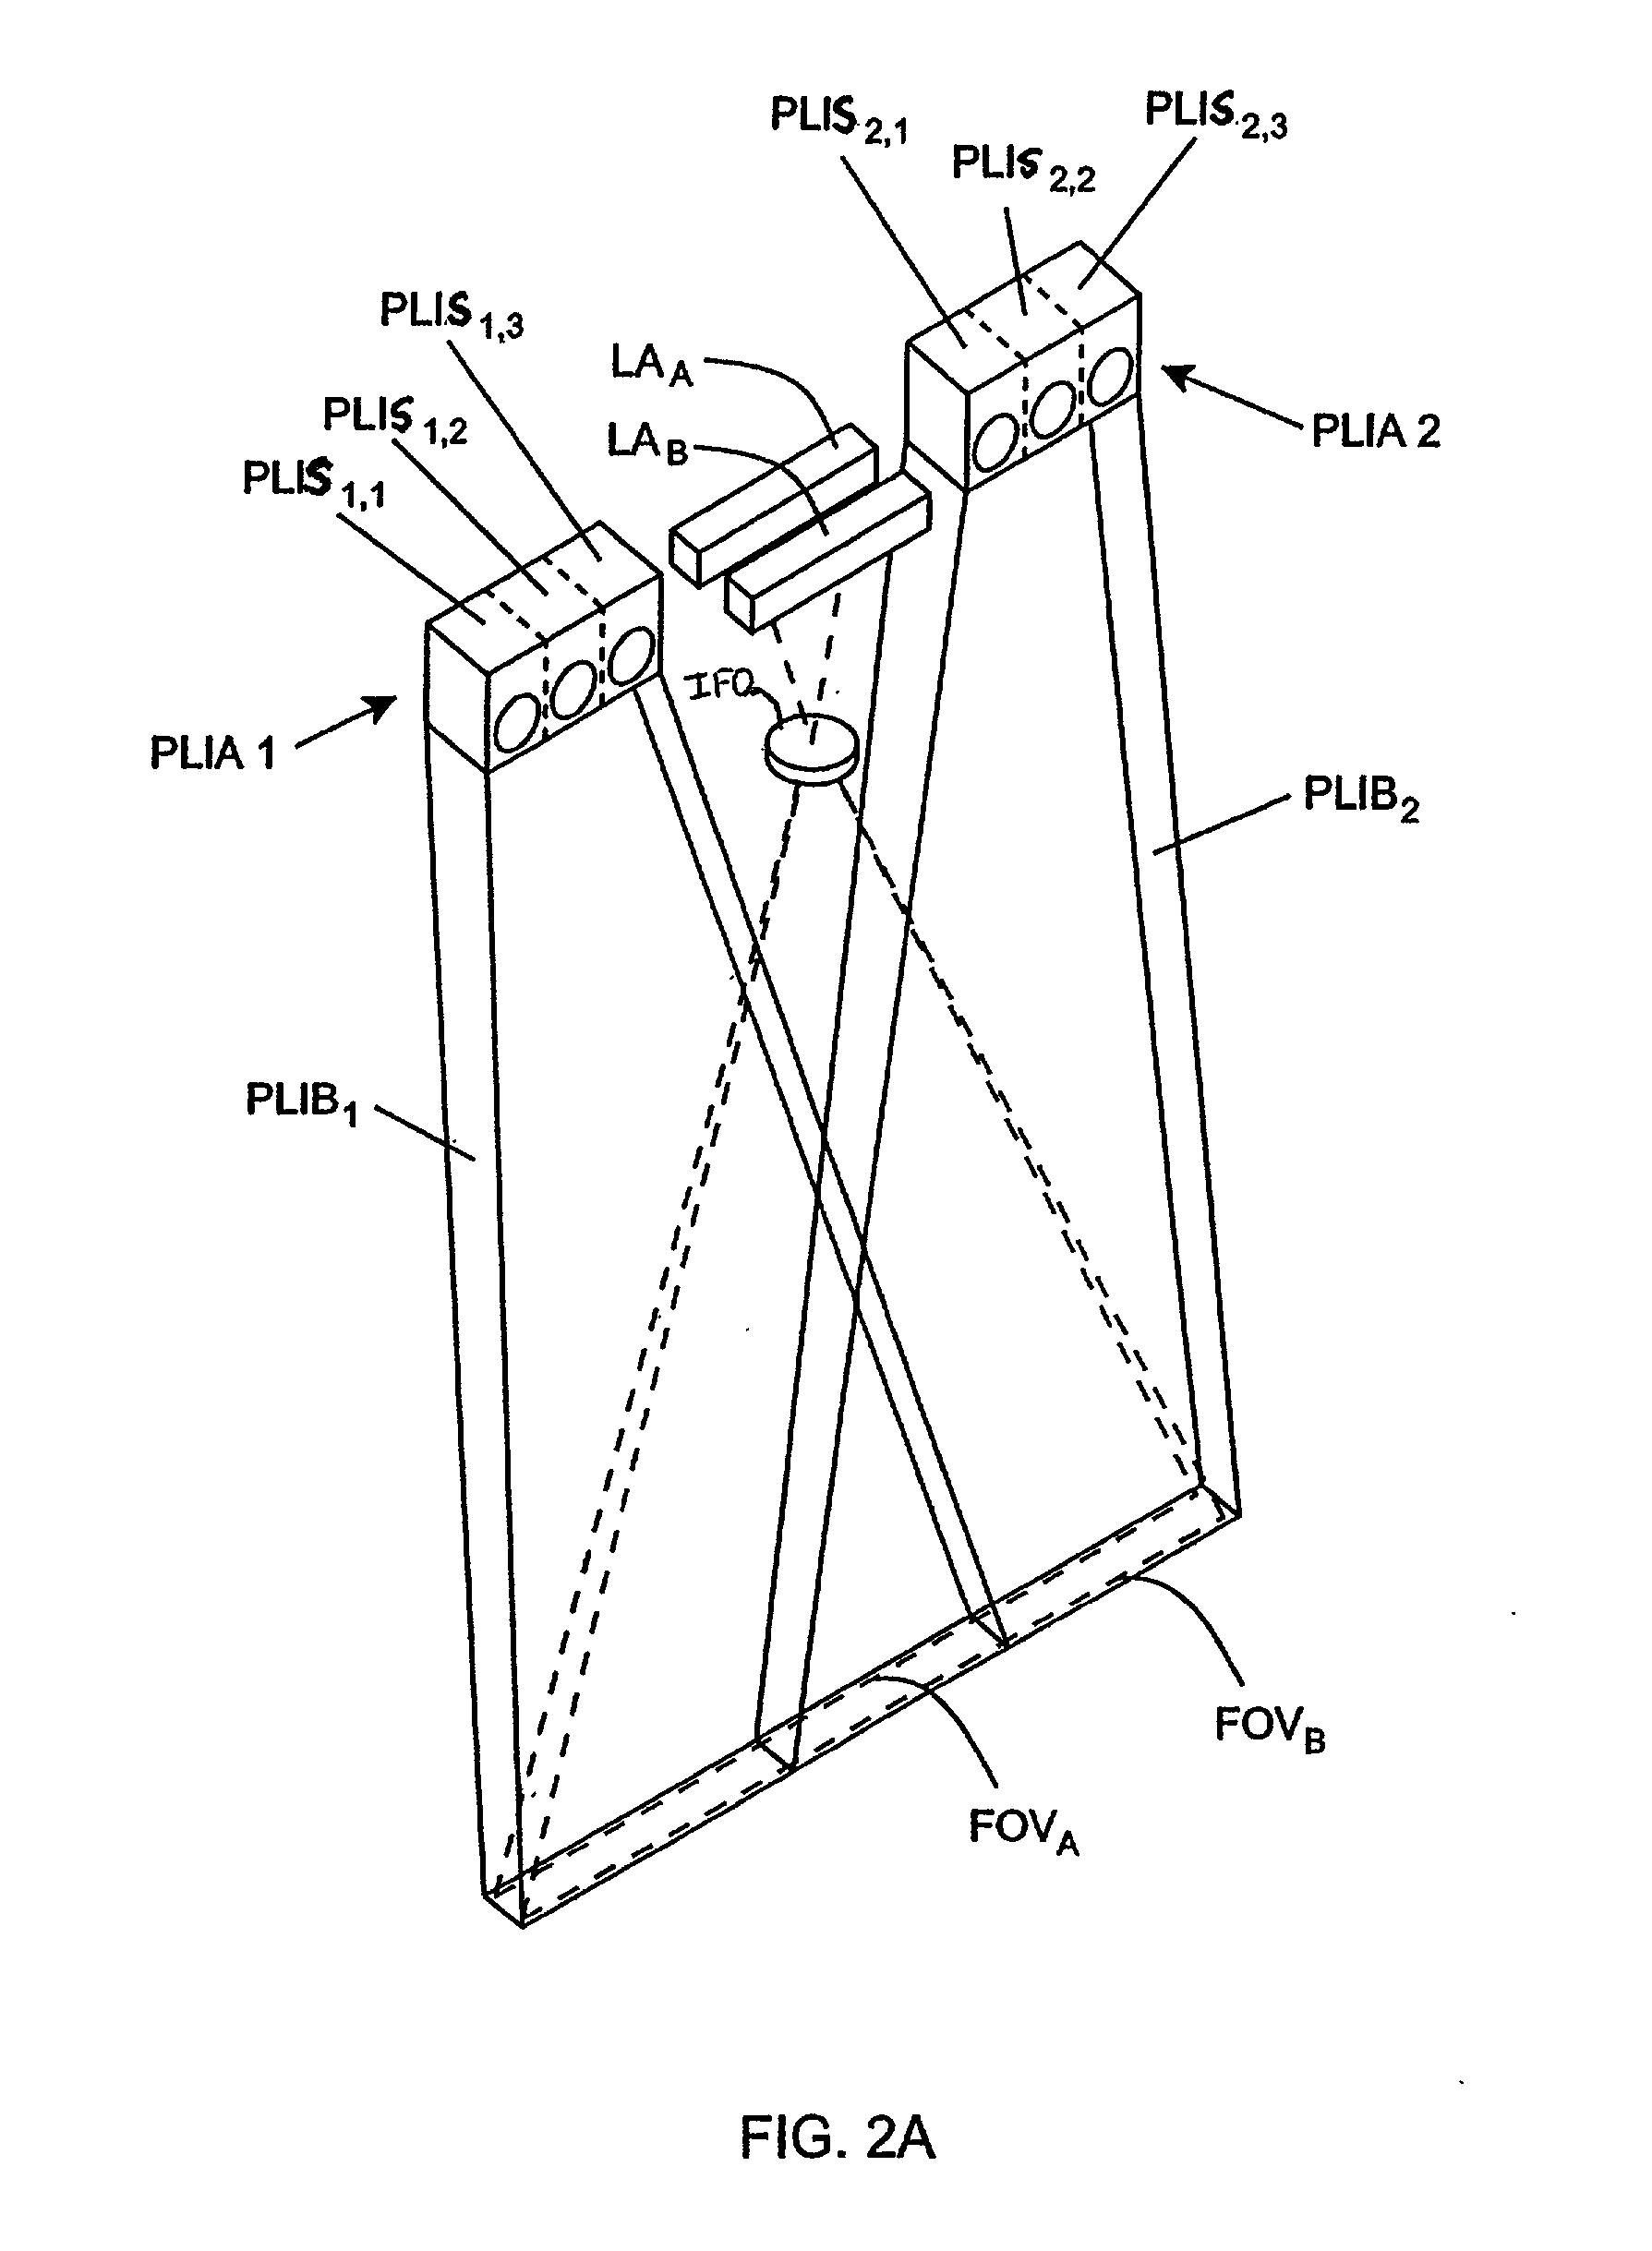 Planar light illumination and imaging device with modulated coherent illumination that reduces speckle noise induced by coherent illumination